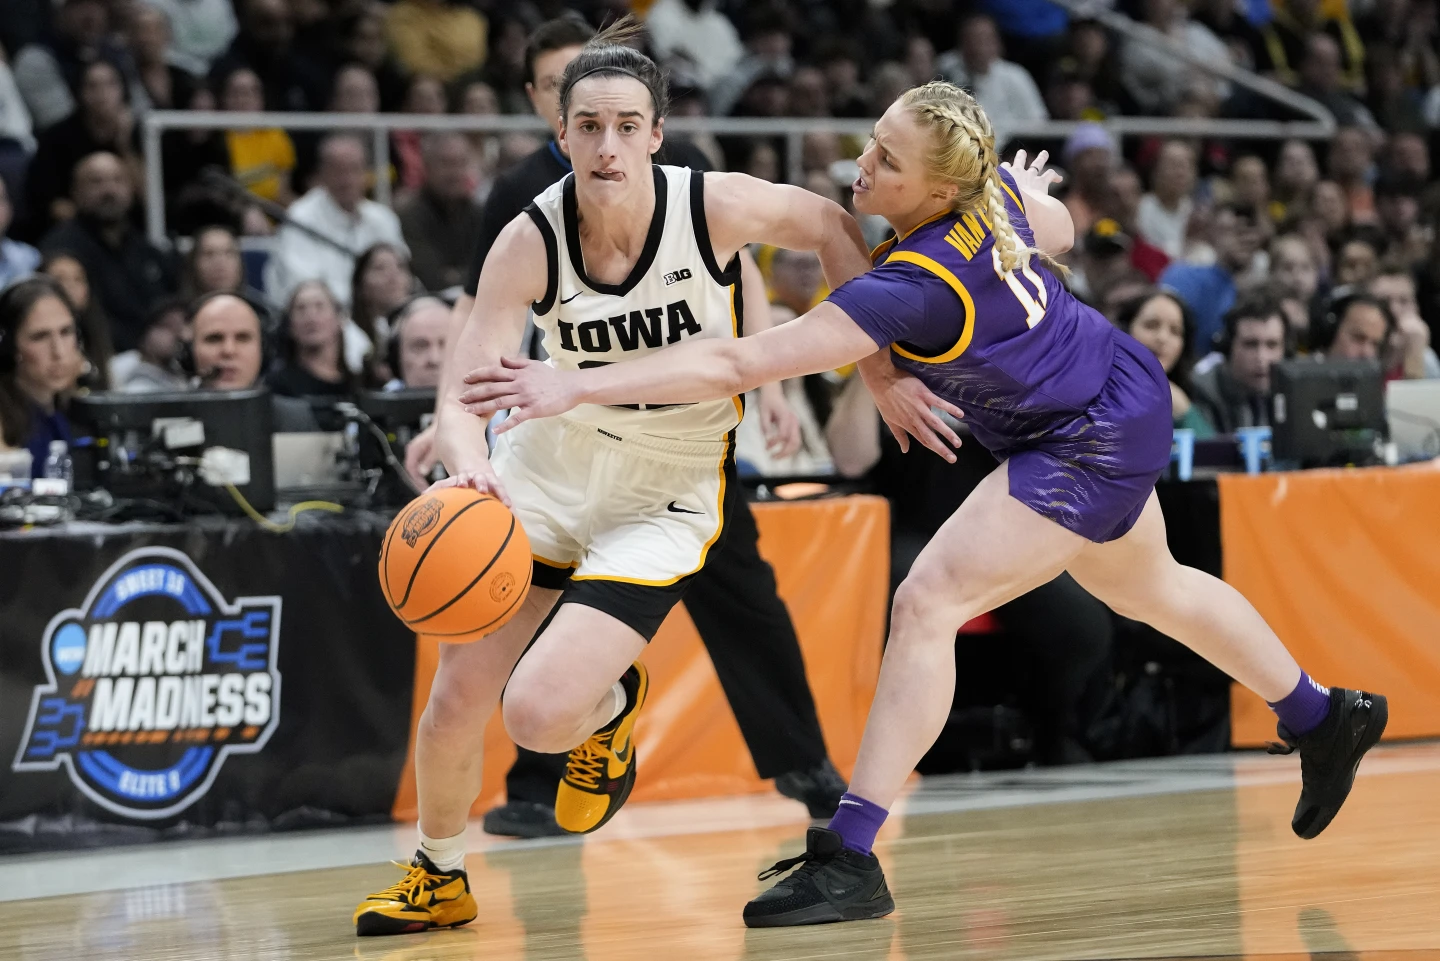 Caitlin Clark drops 41, as Iowa heads back to Final Four, after win over defending champs LSU